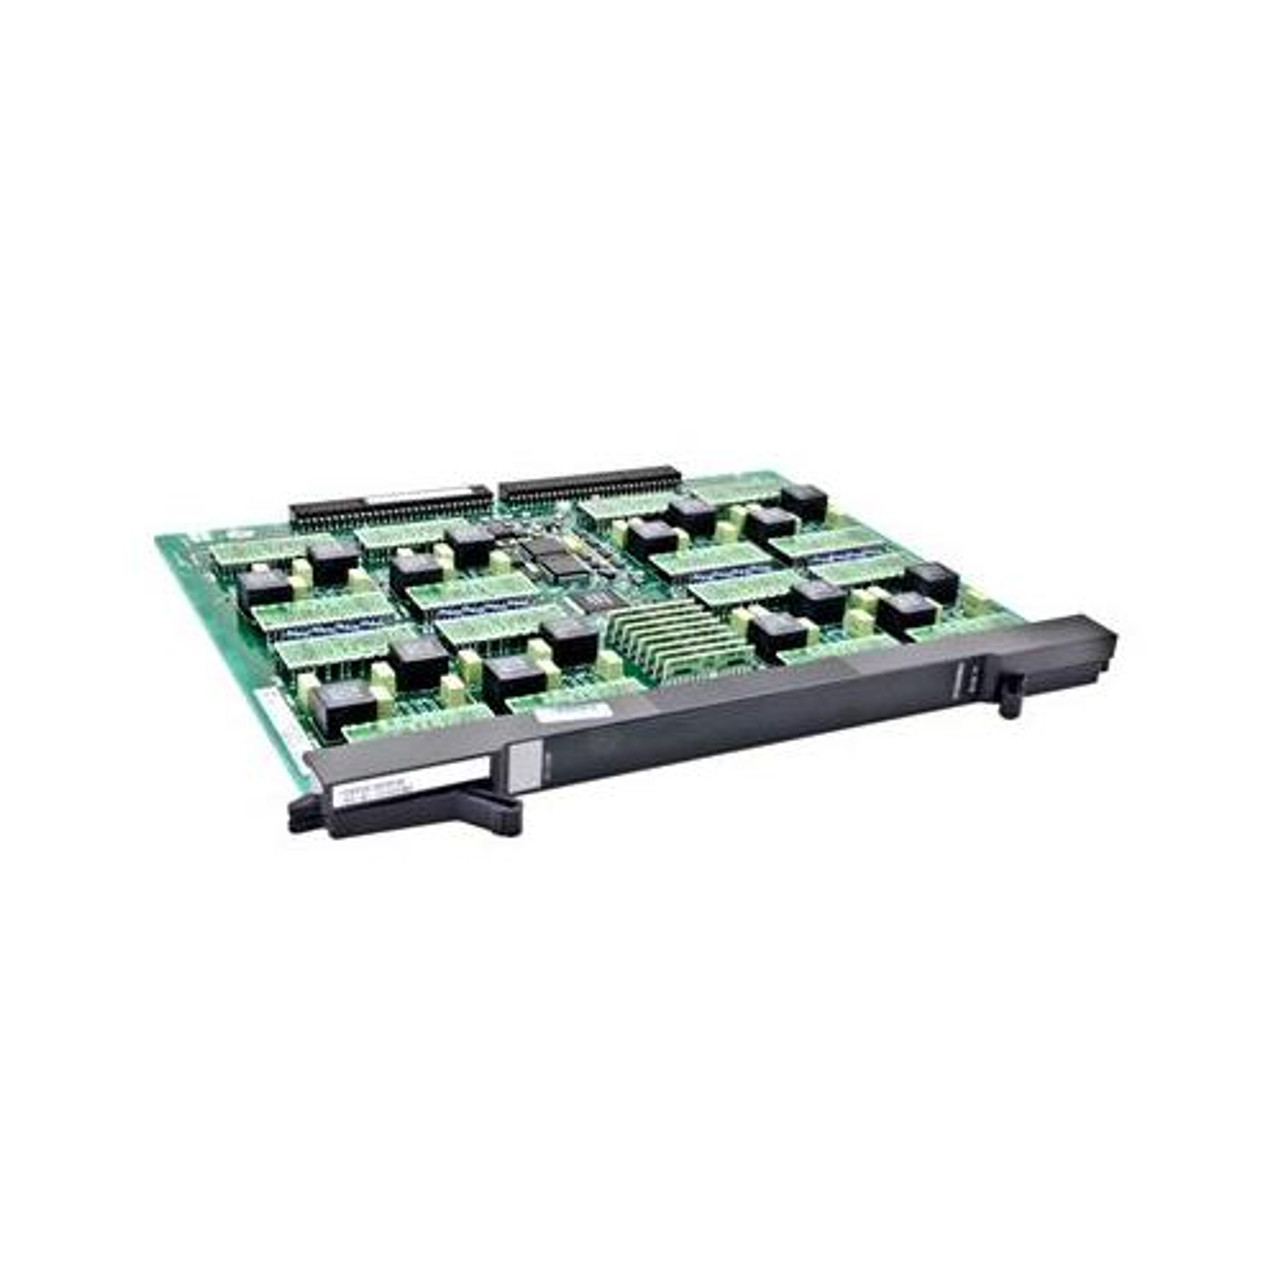 01-SSC-4745 SonicWALL Scrutinizer Msp Module From 100 to 150 (Refurbished)